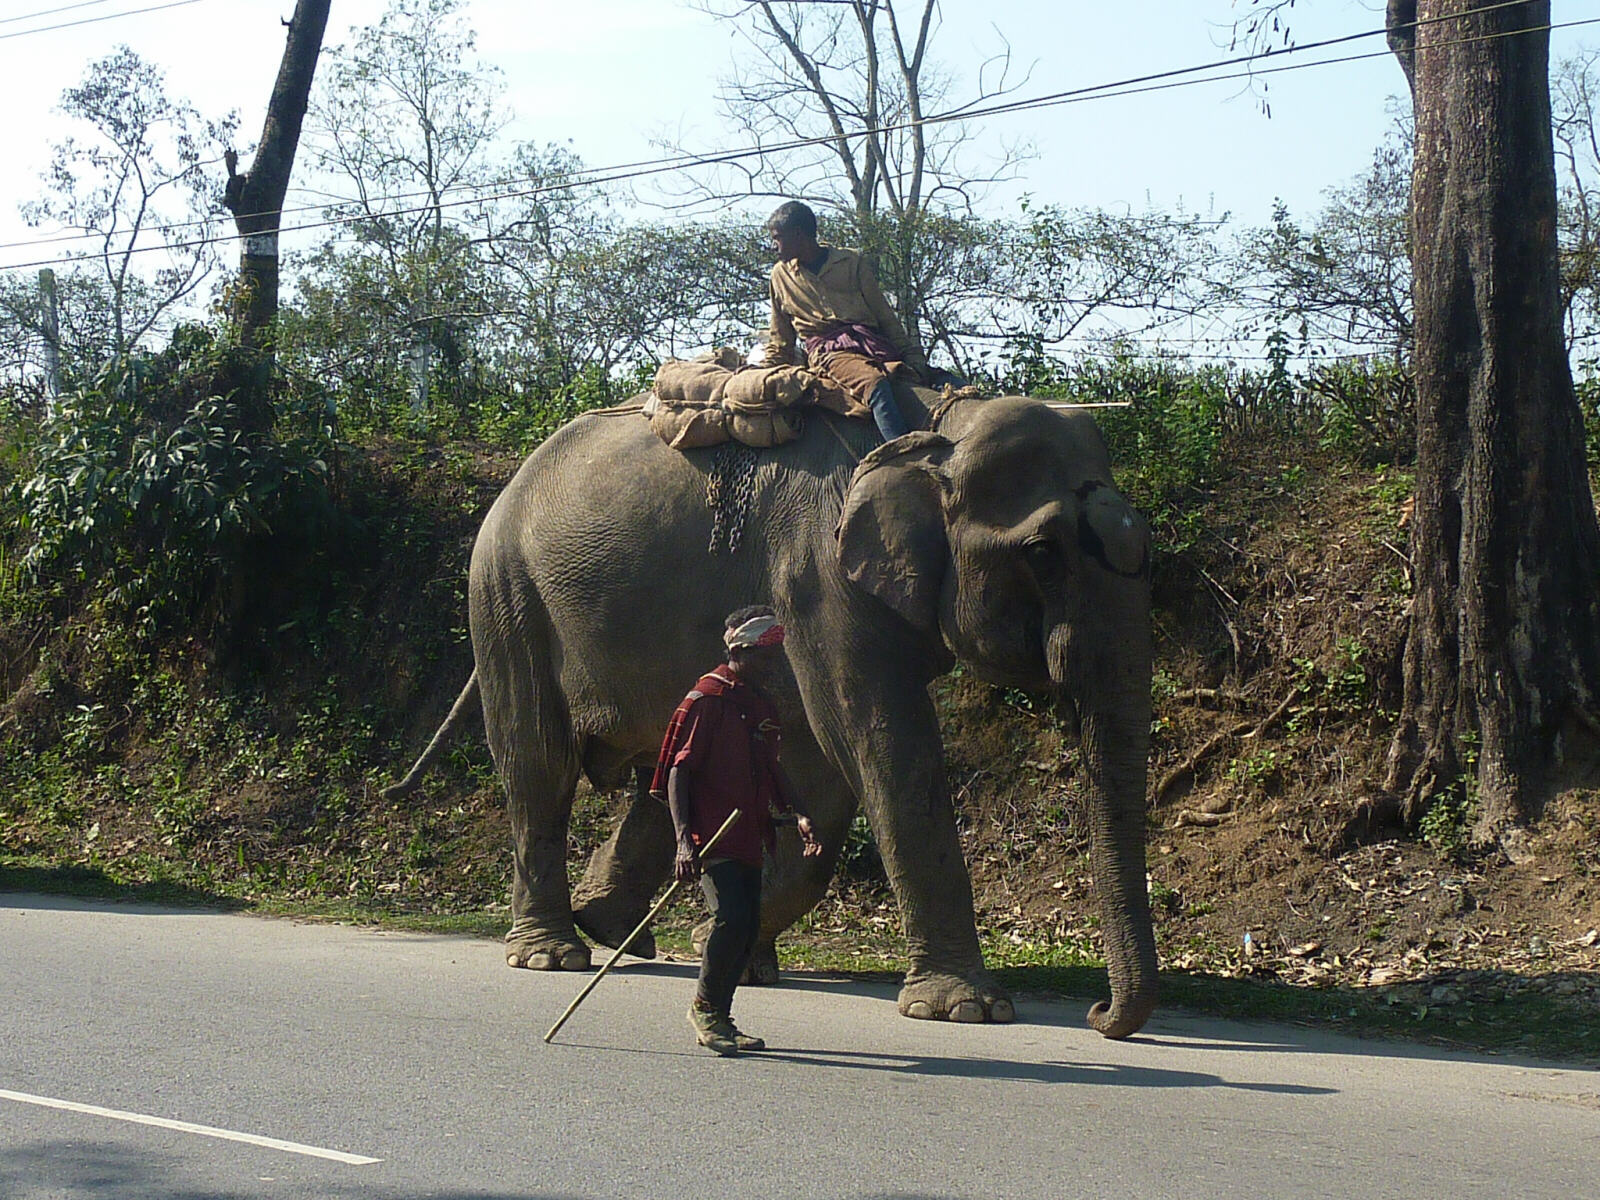 An elephant on the Ledo Road in Assam, India